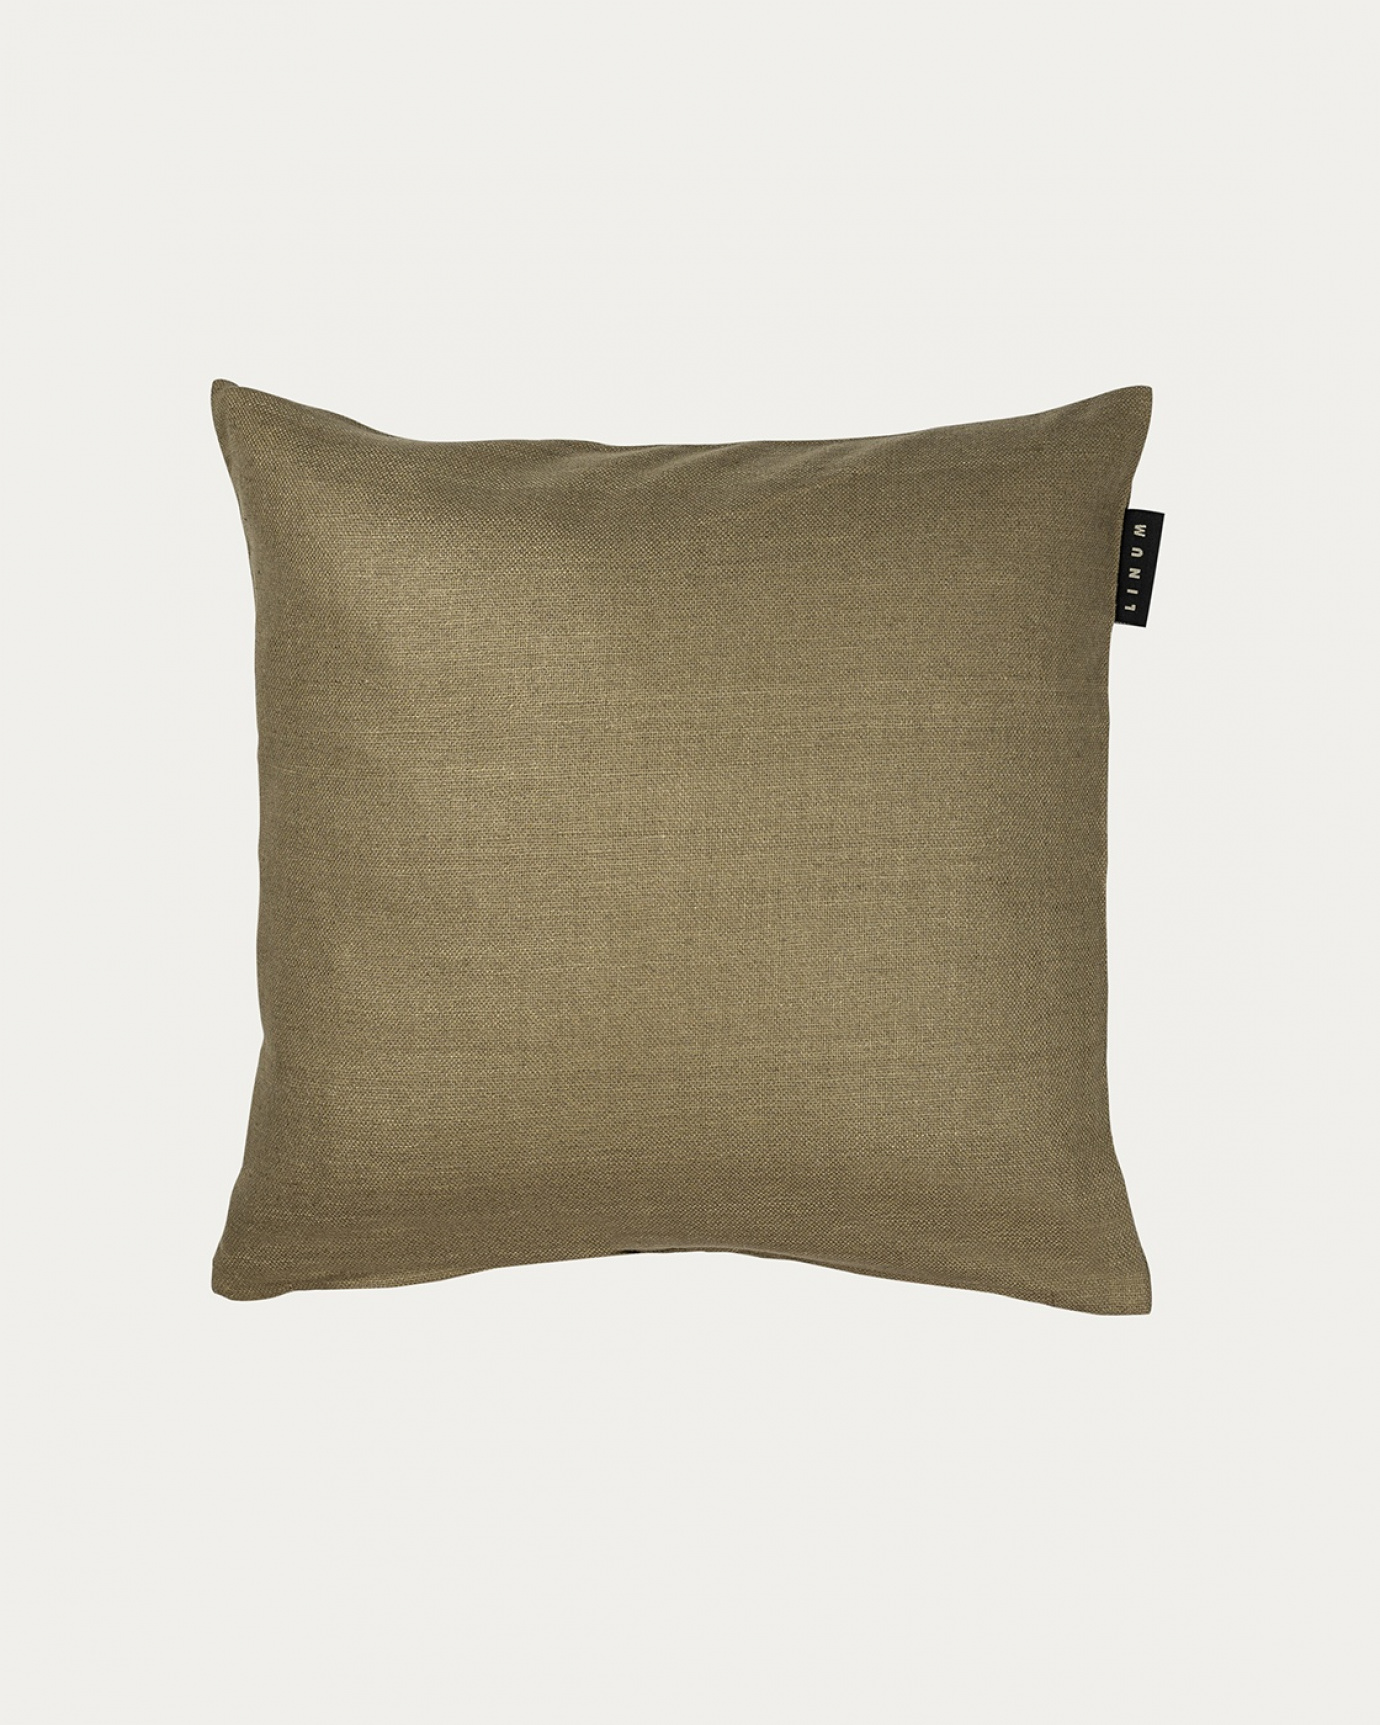 Product image light bear brown SETA cushion cover made of 100% raw silk that gives a nice lustre from LINUM DESIGN. Size 40x40 cm.